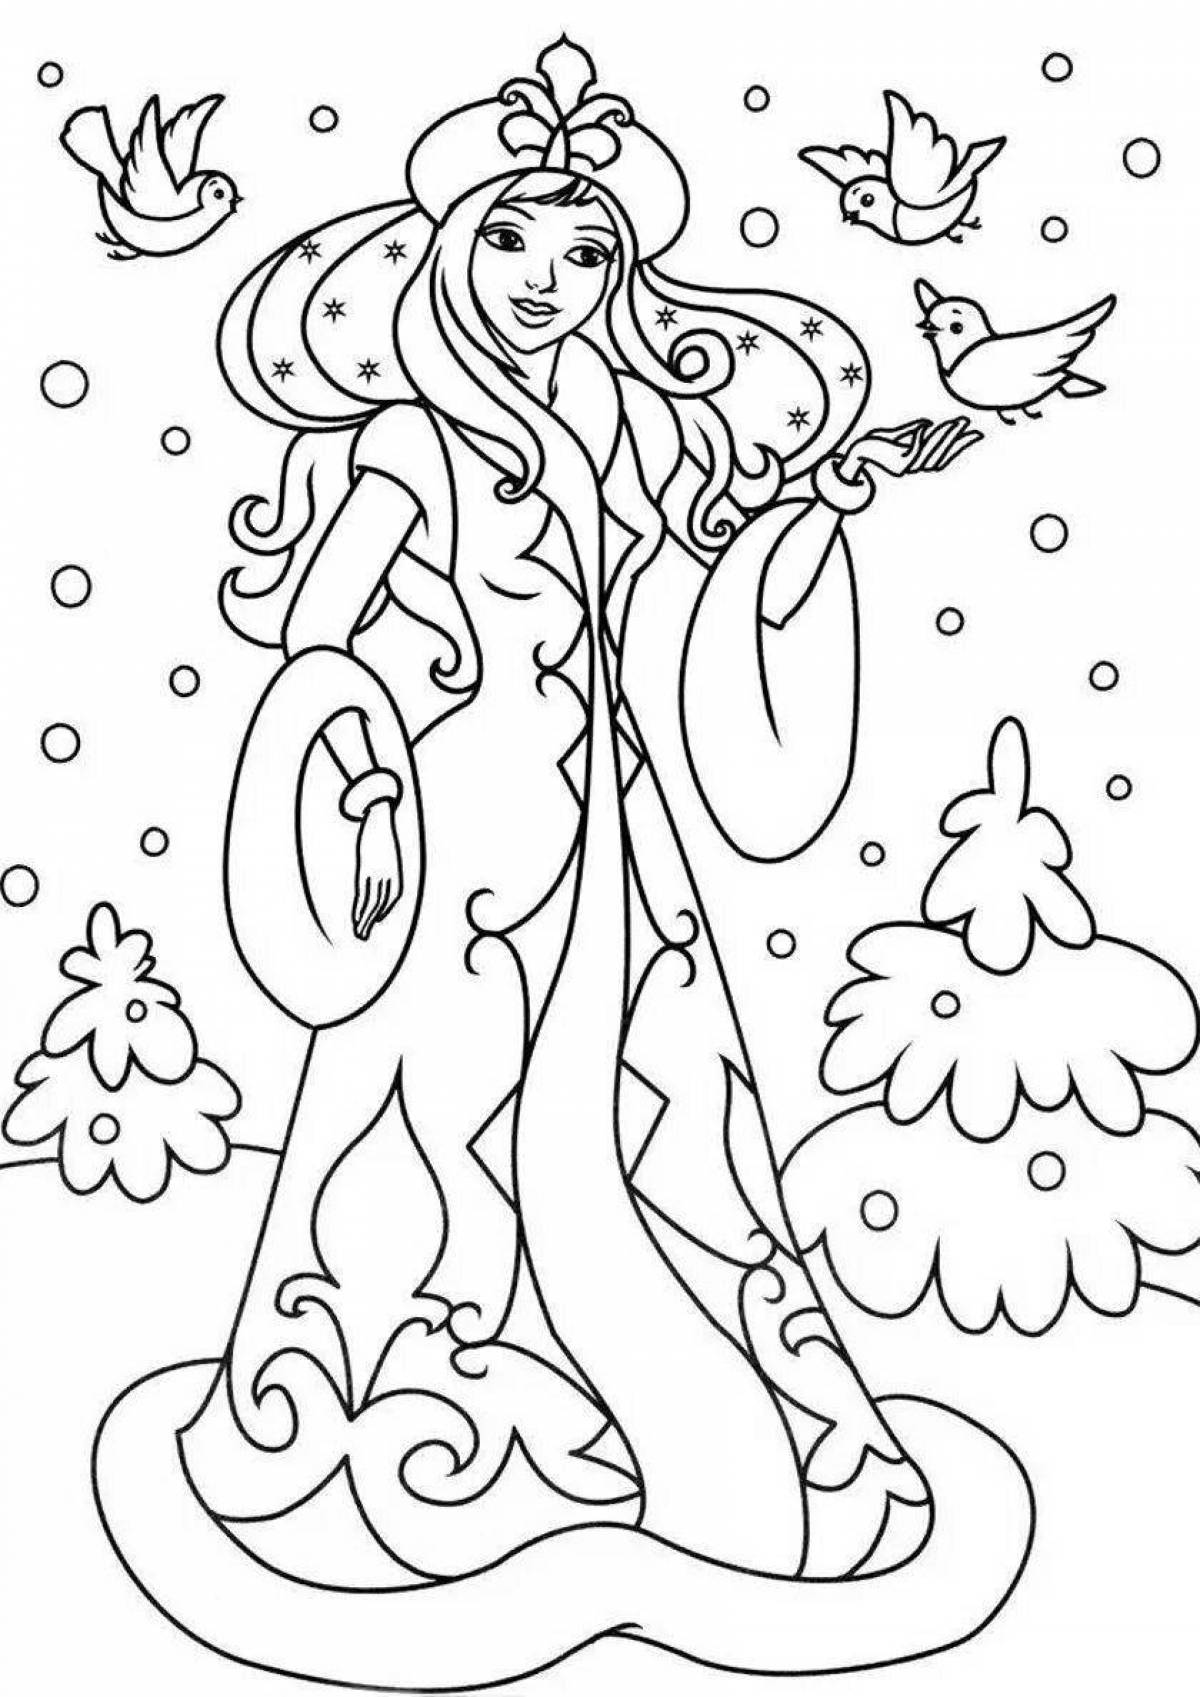 Great winter portrait coloring page